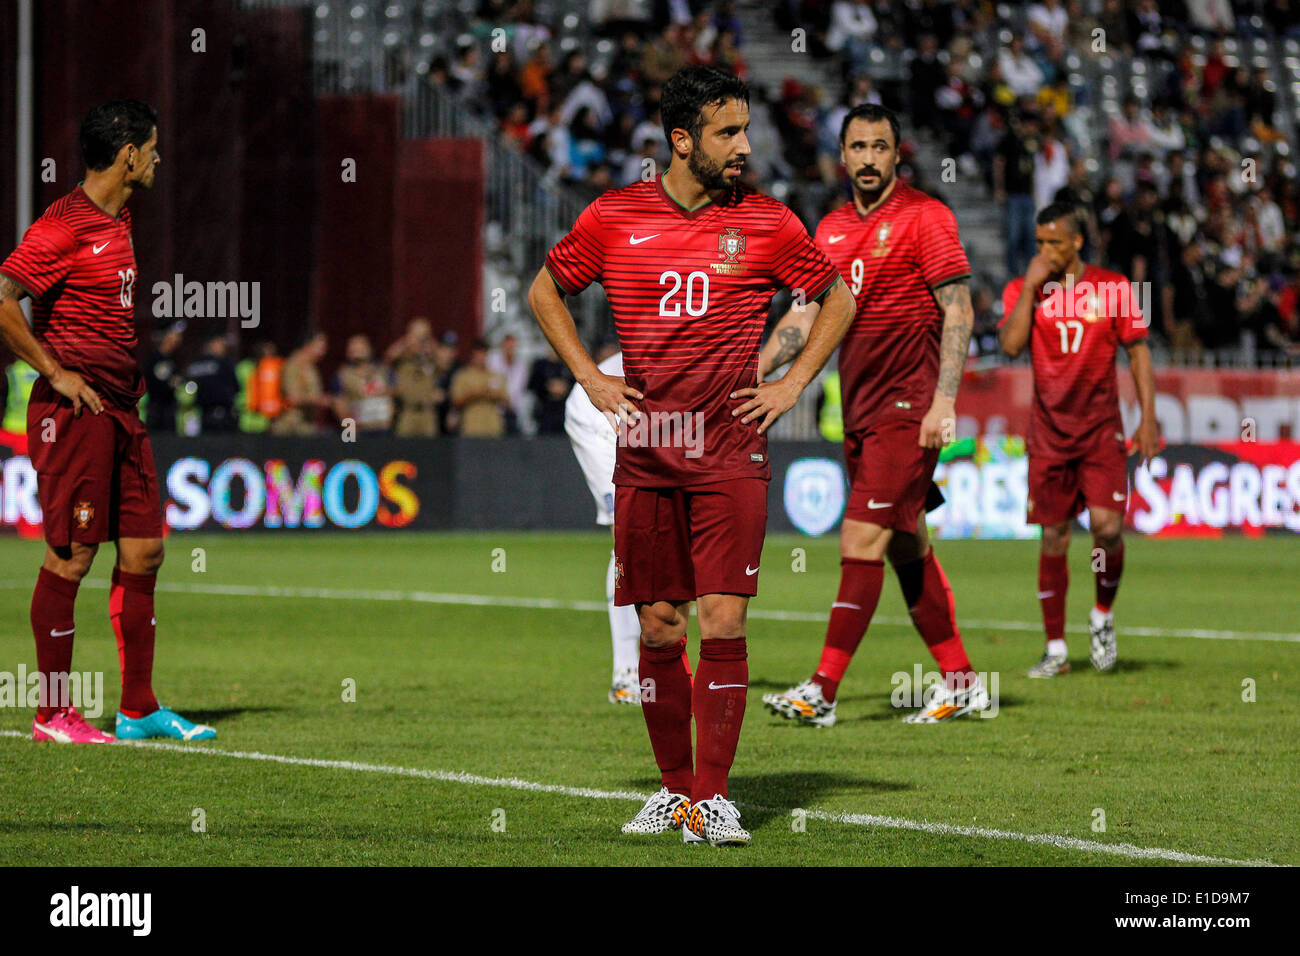 Lisbon, Porrtugal. 31st May, 2014. Portugal midfielder Ruben Amorin (20) during preparatory friendly match for the World Cup at the National Stadium in Lisbon, Portugal, Saturday, May 31, 2014. Credit:  Leonardo Mota/Alamy Live News Stock Photo